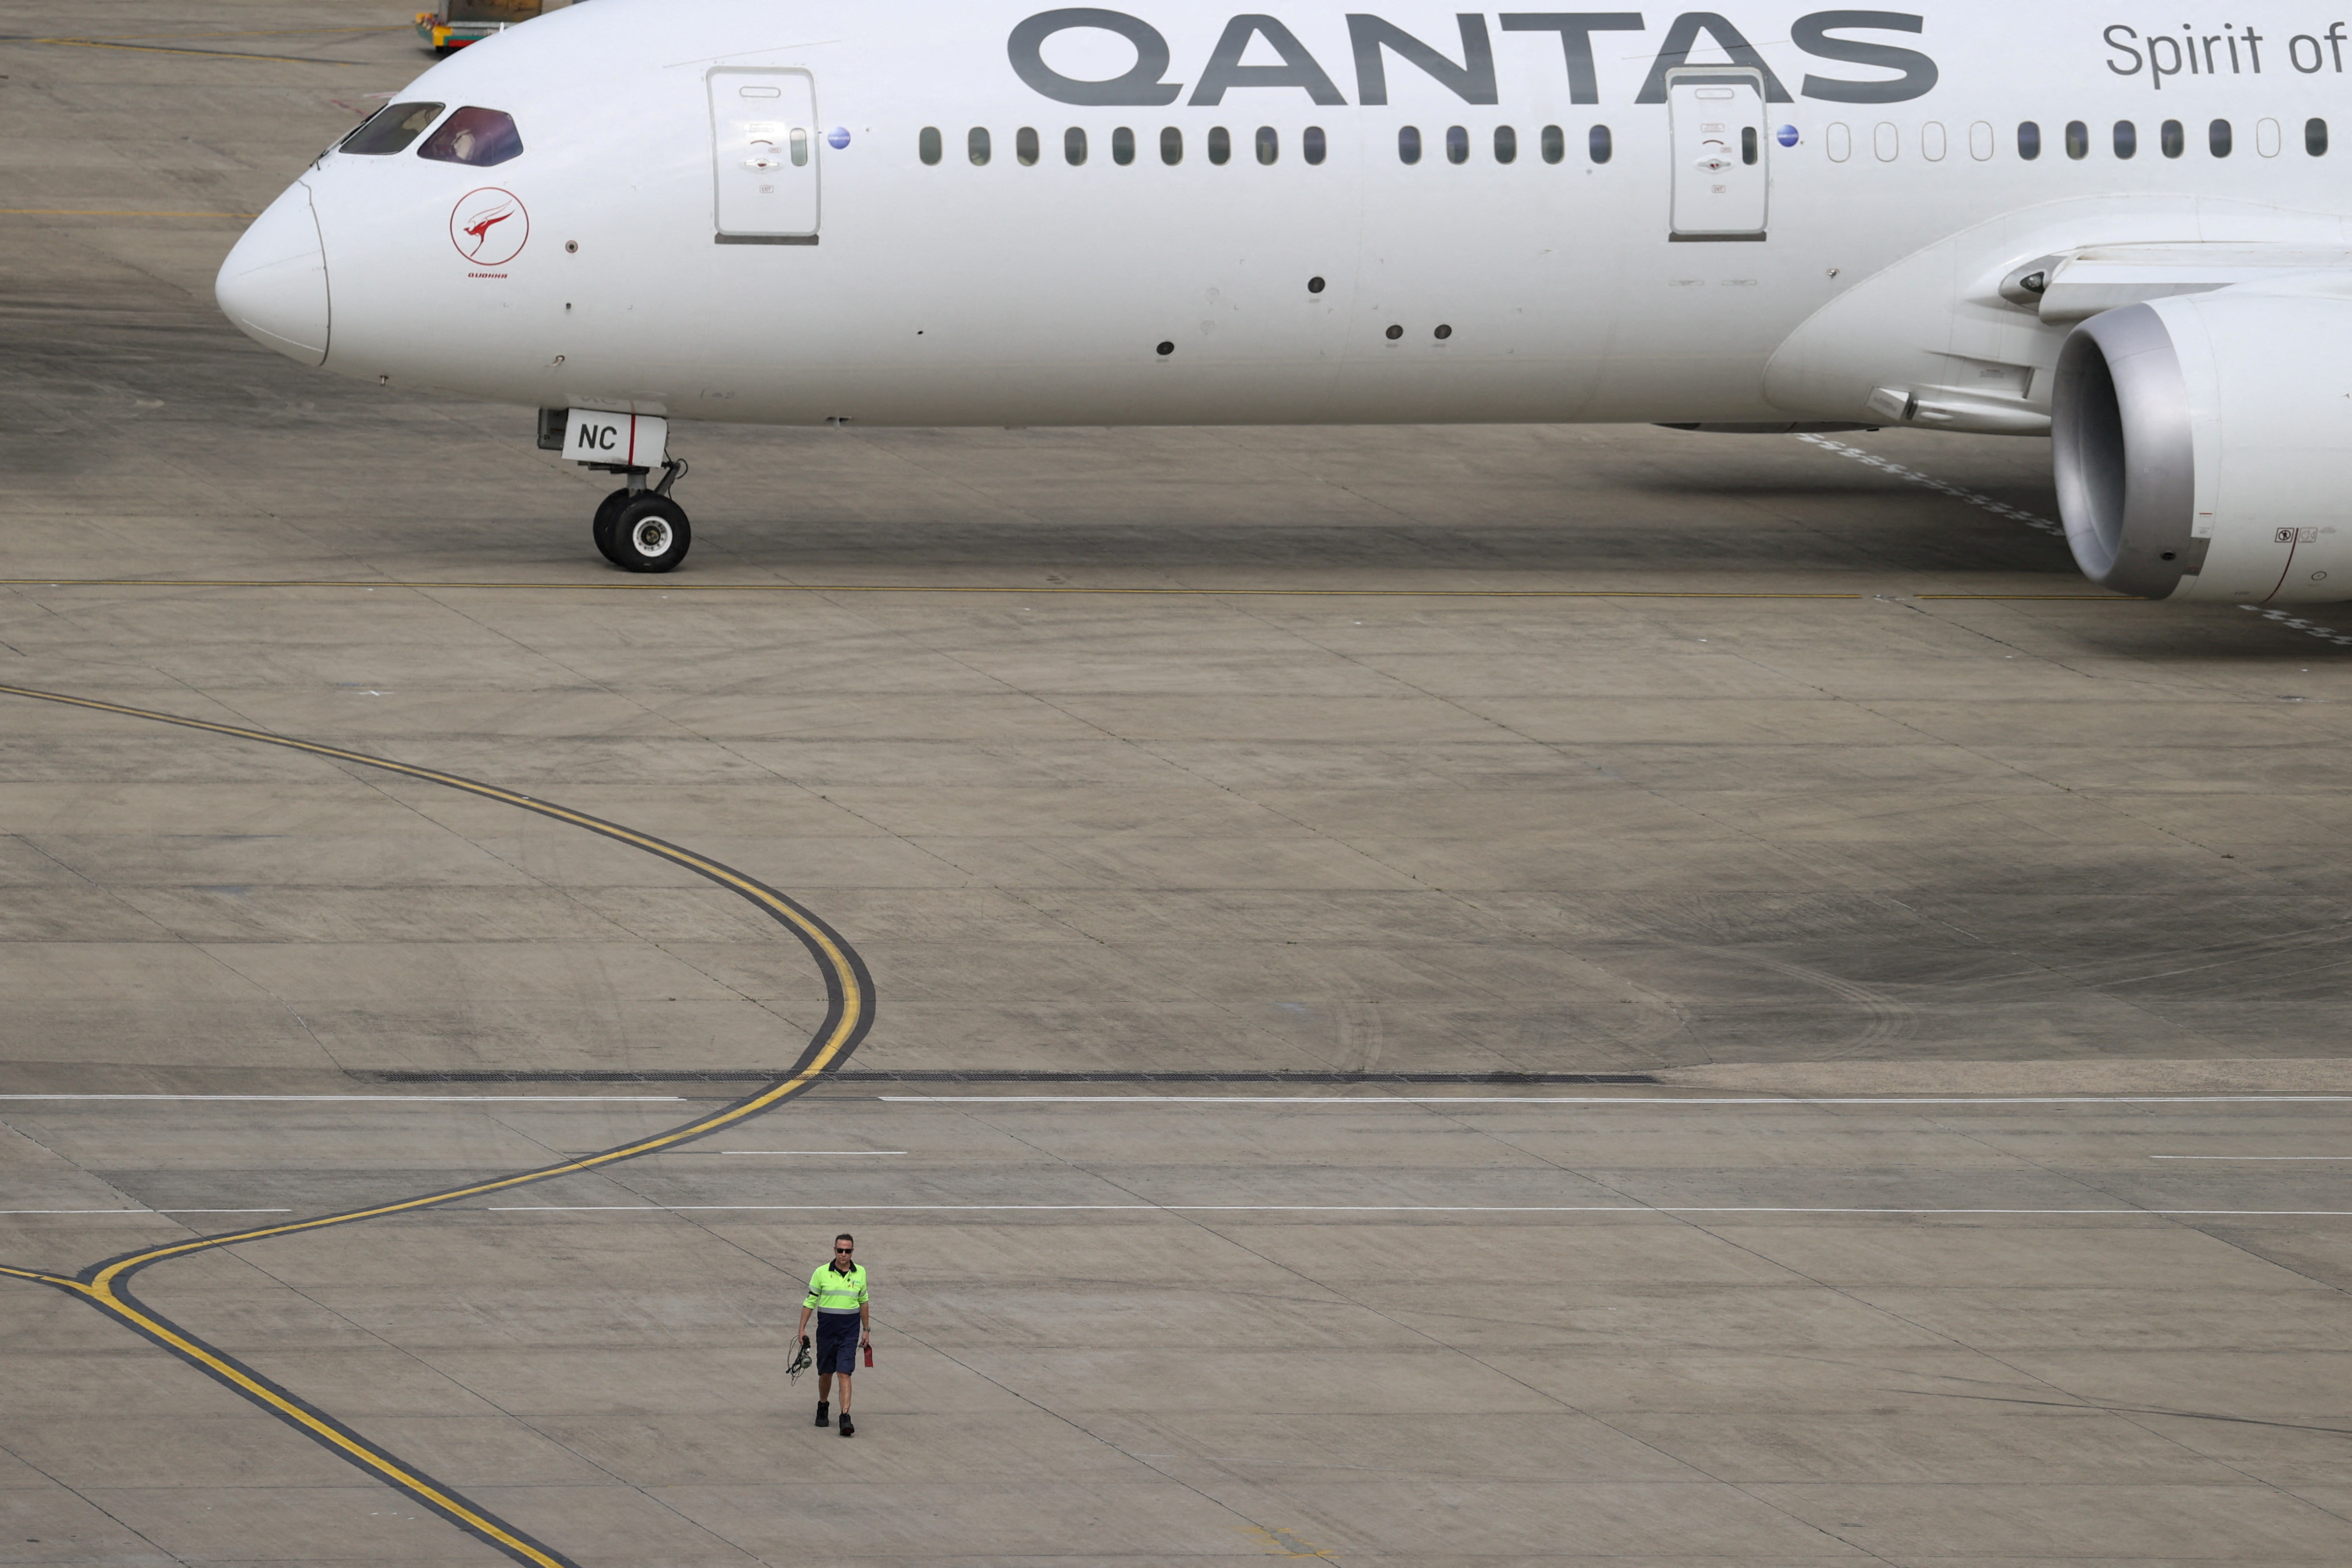 A ground worker walking near a Qantas plane is seen from the international terminal at Sydney Airport